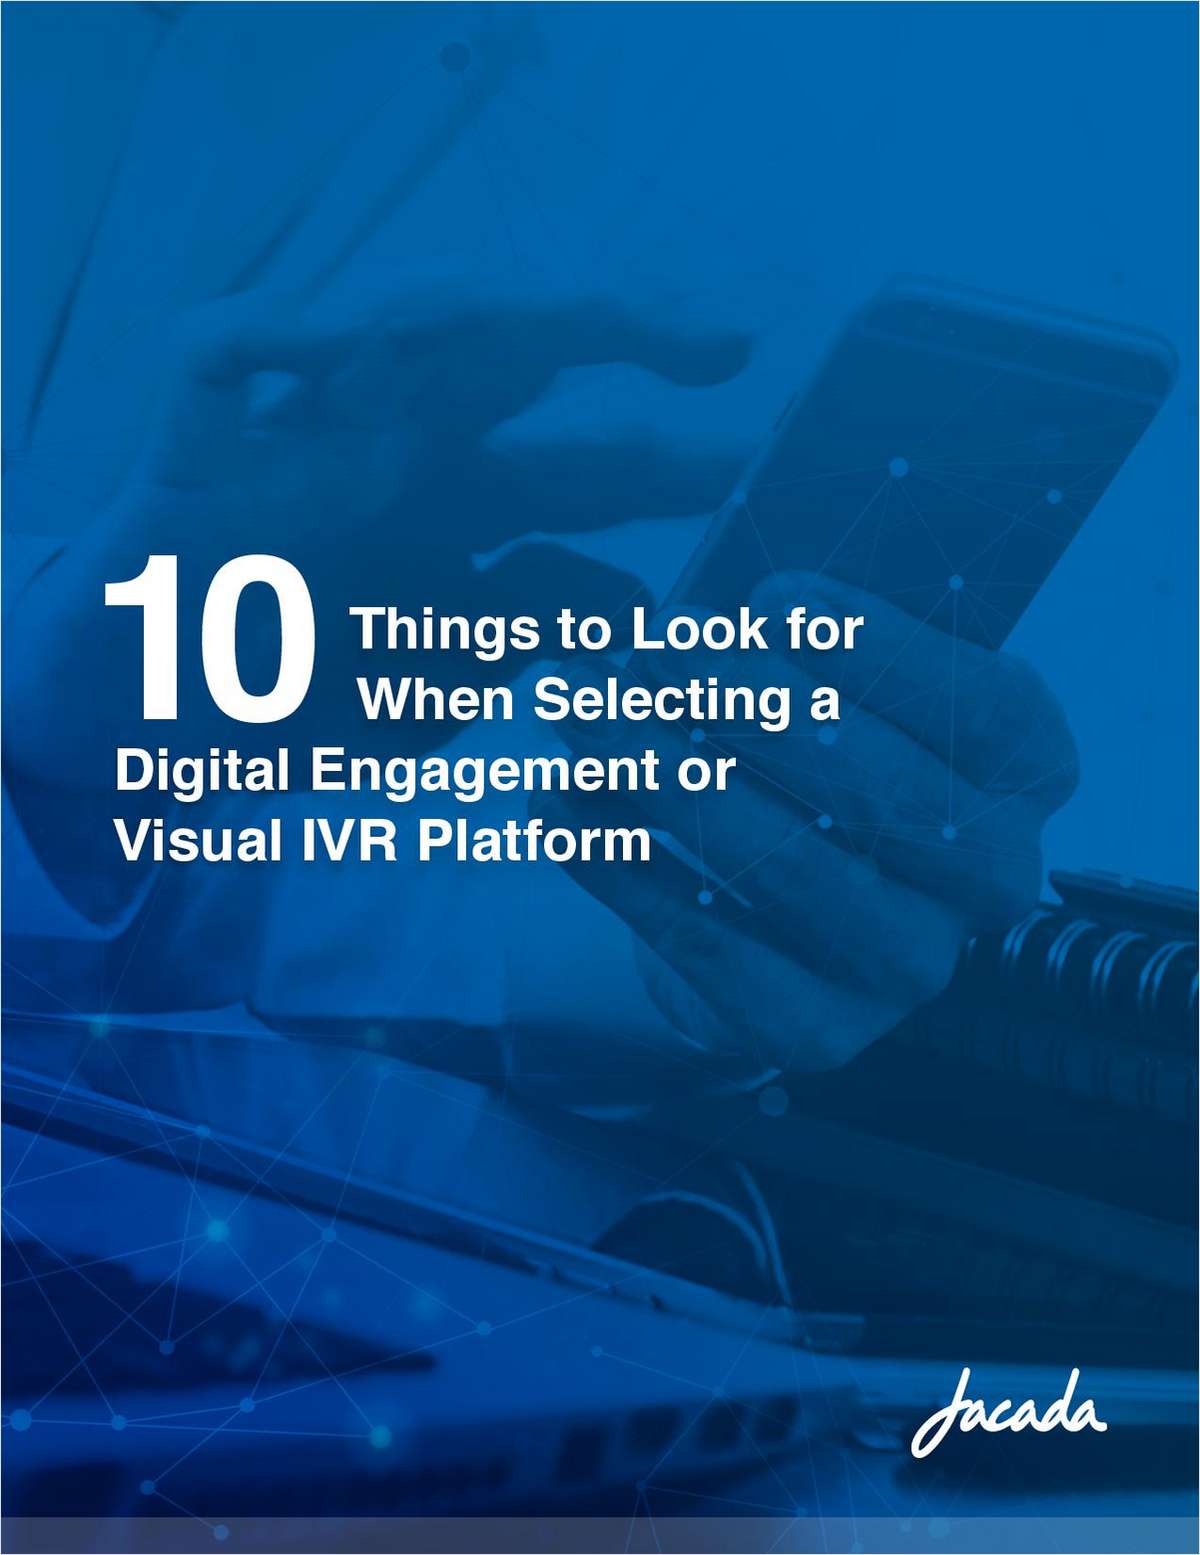 10 Things to Look For When Selecting a Digital Engagement or Visual IVR Platform